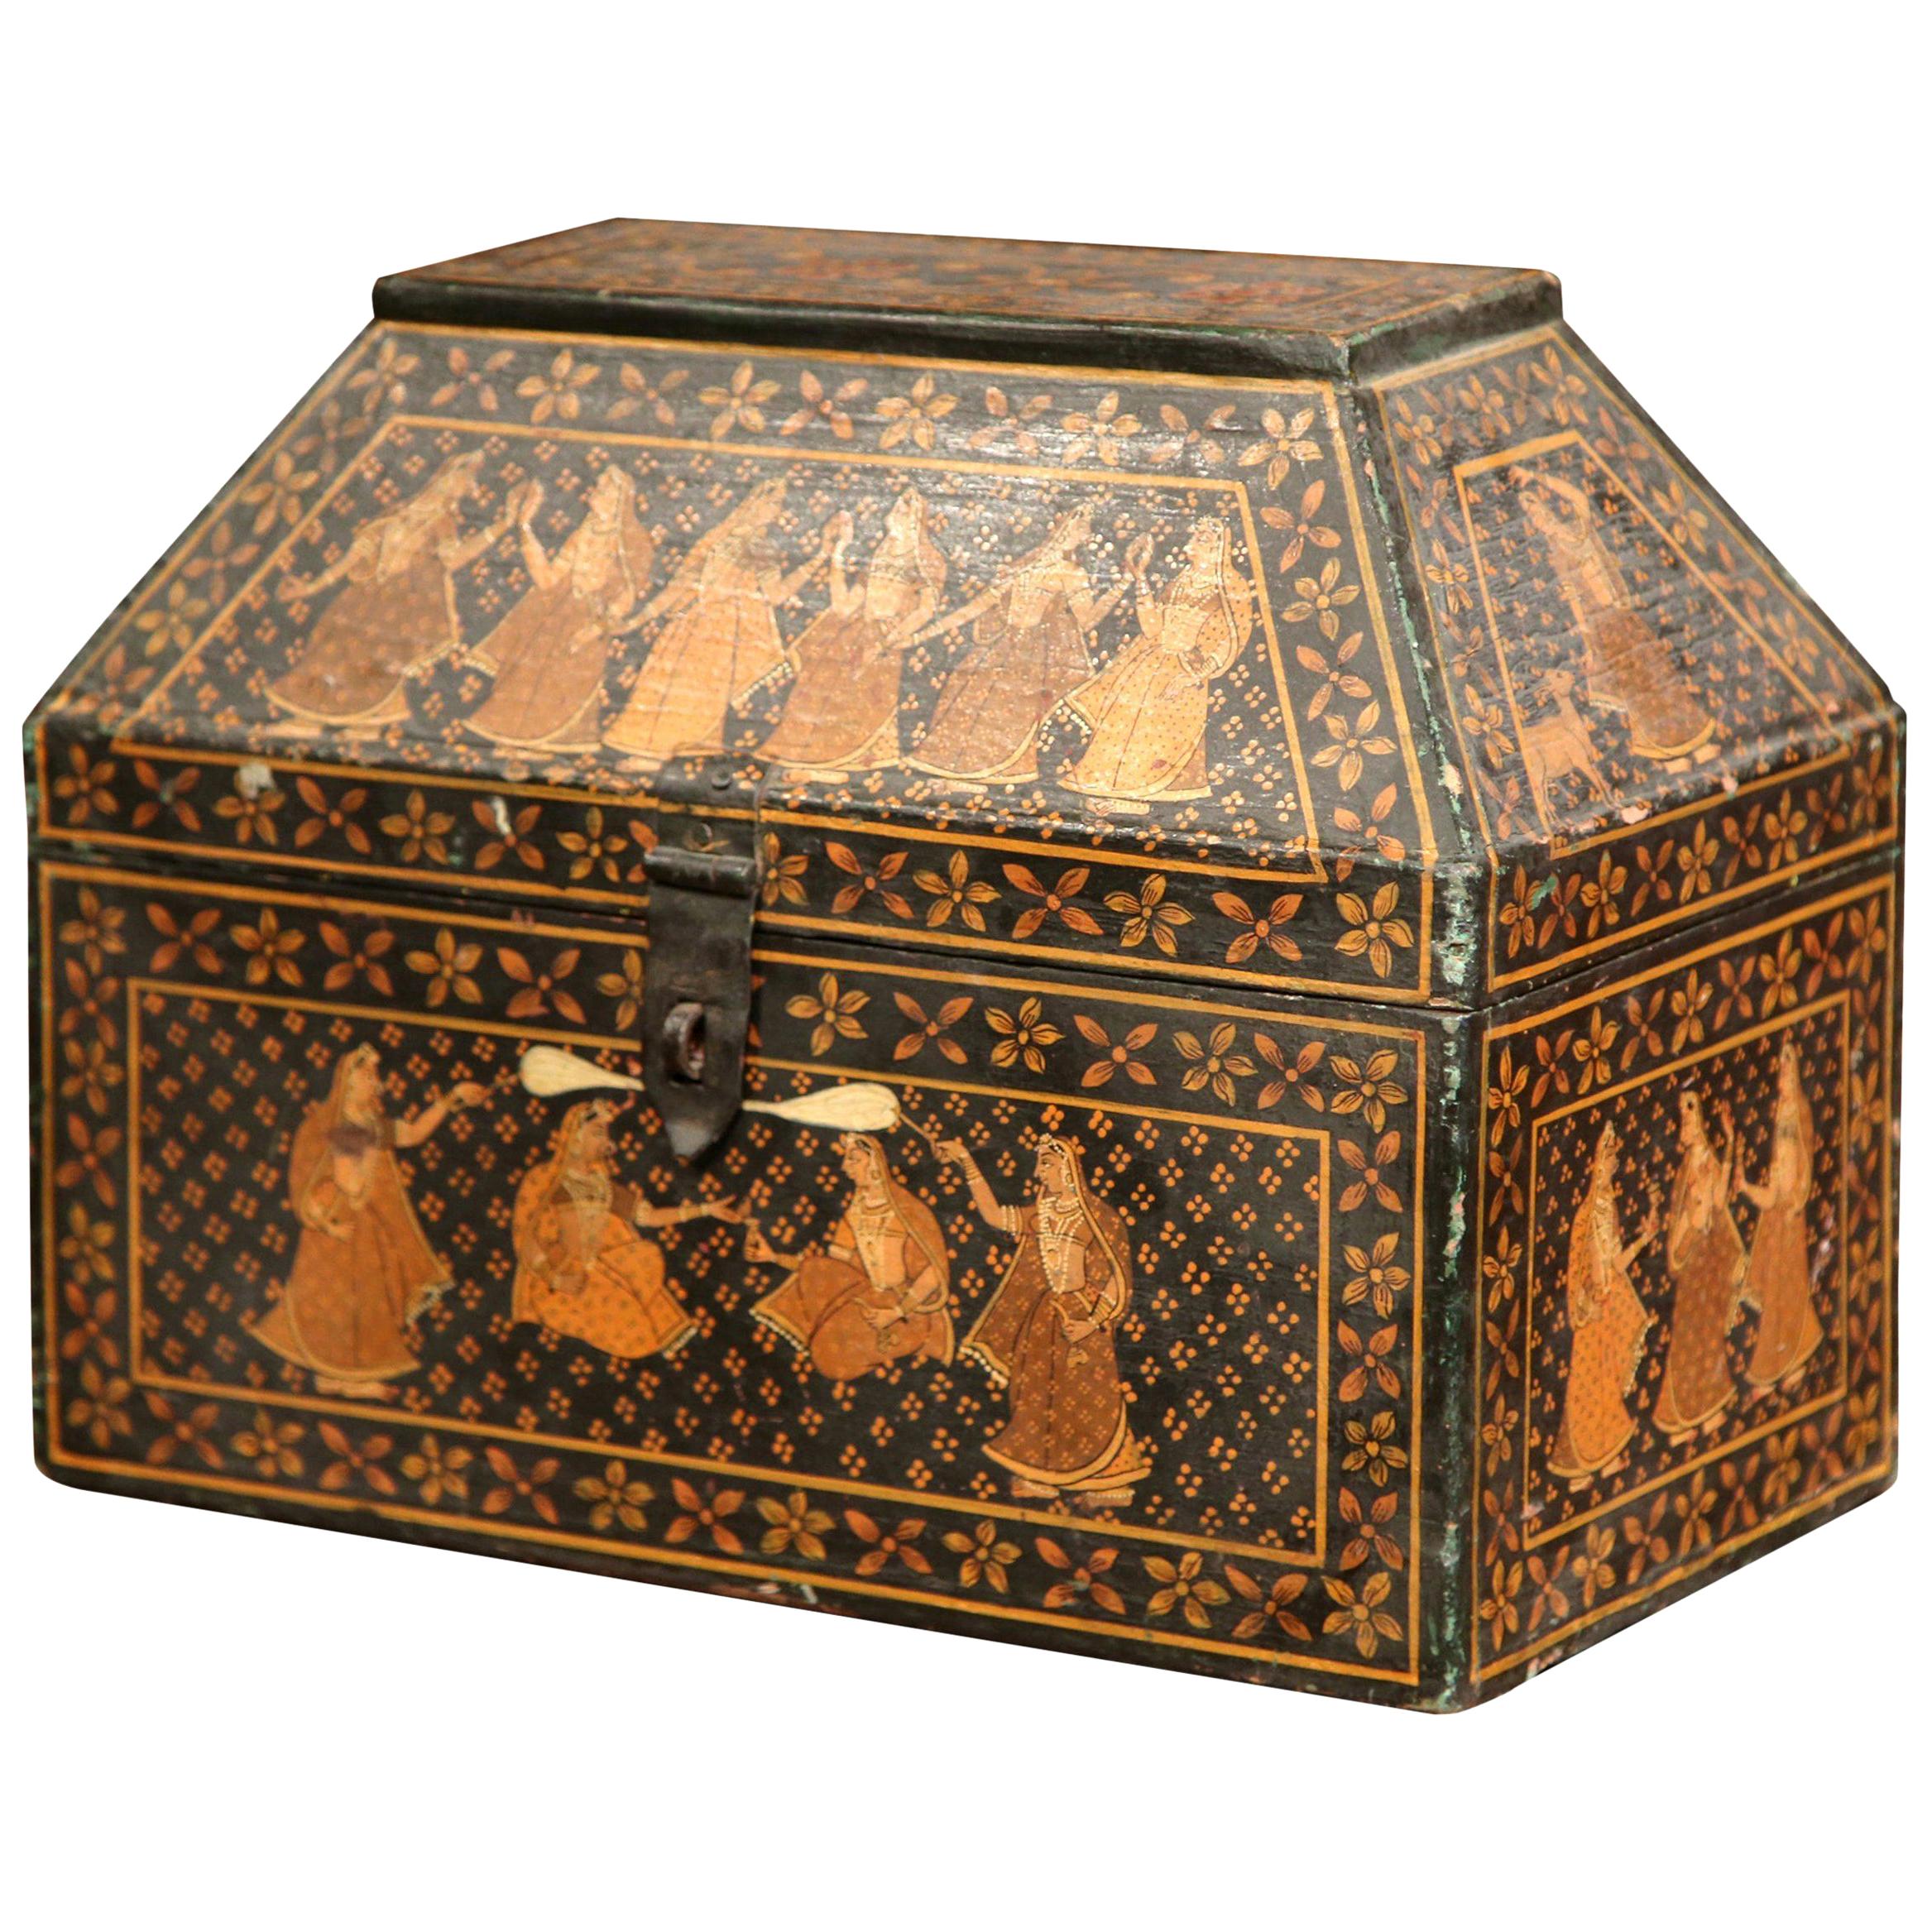 19th Century French Painted Decorative Wood Box with Oriental Figure Decor For Sale